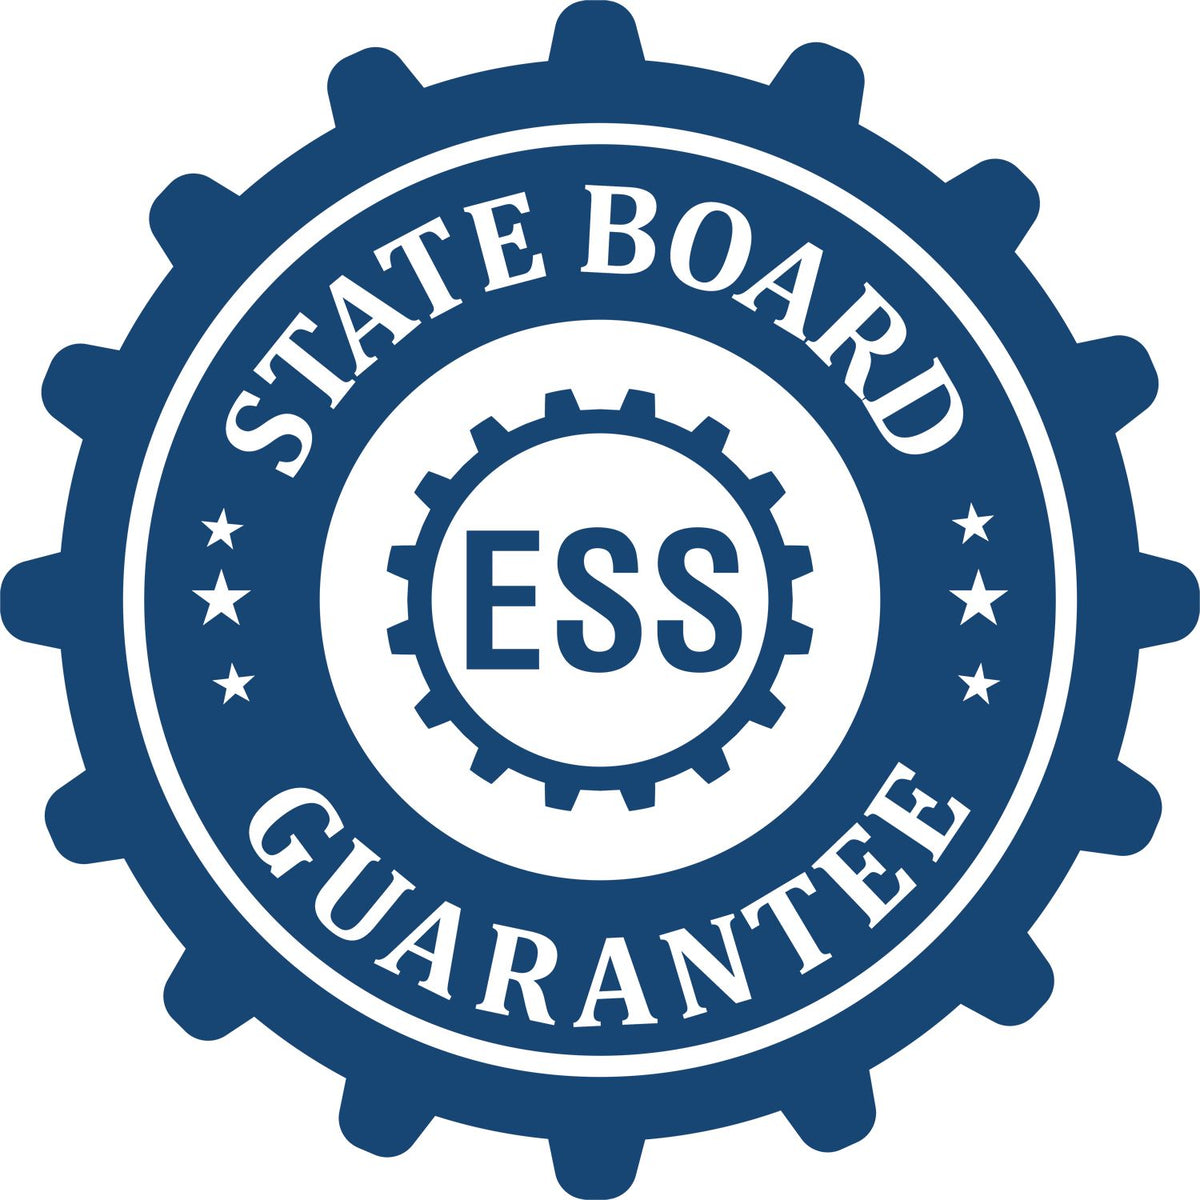 An emblem in a gear shape illustrating a state board guarantee for the Digital Delaware Landscape Architect Stamp product.